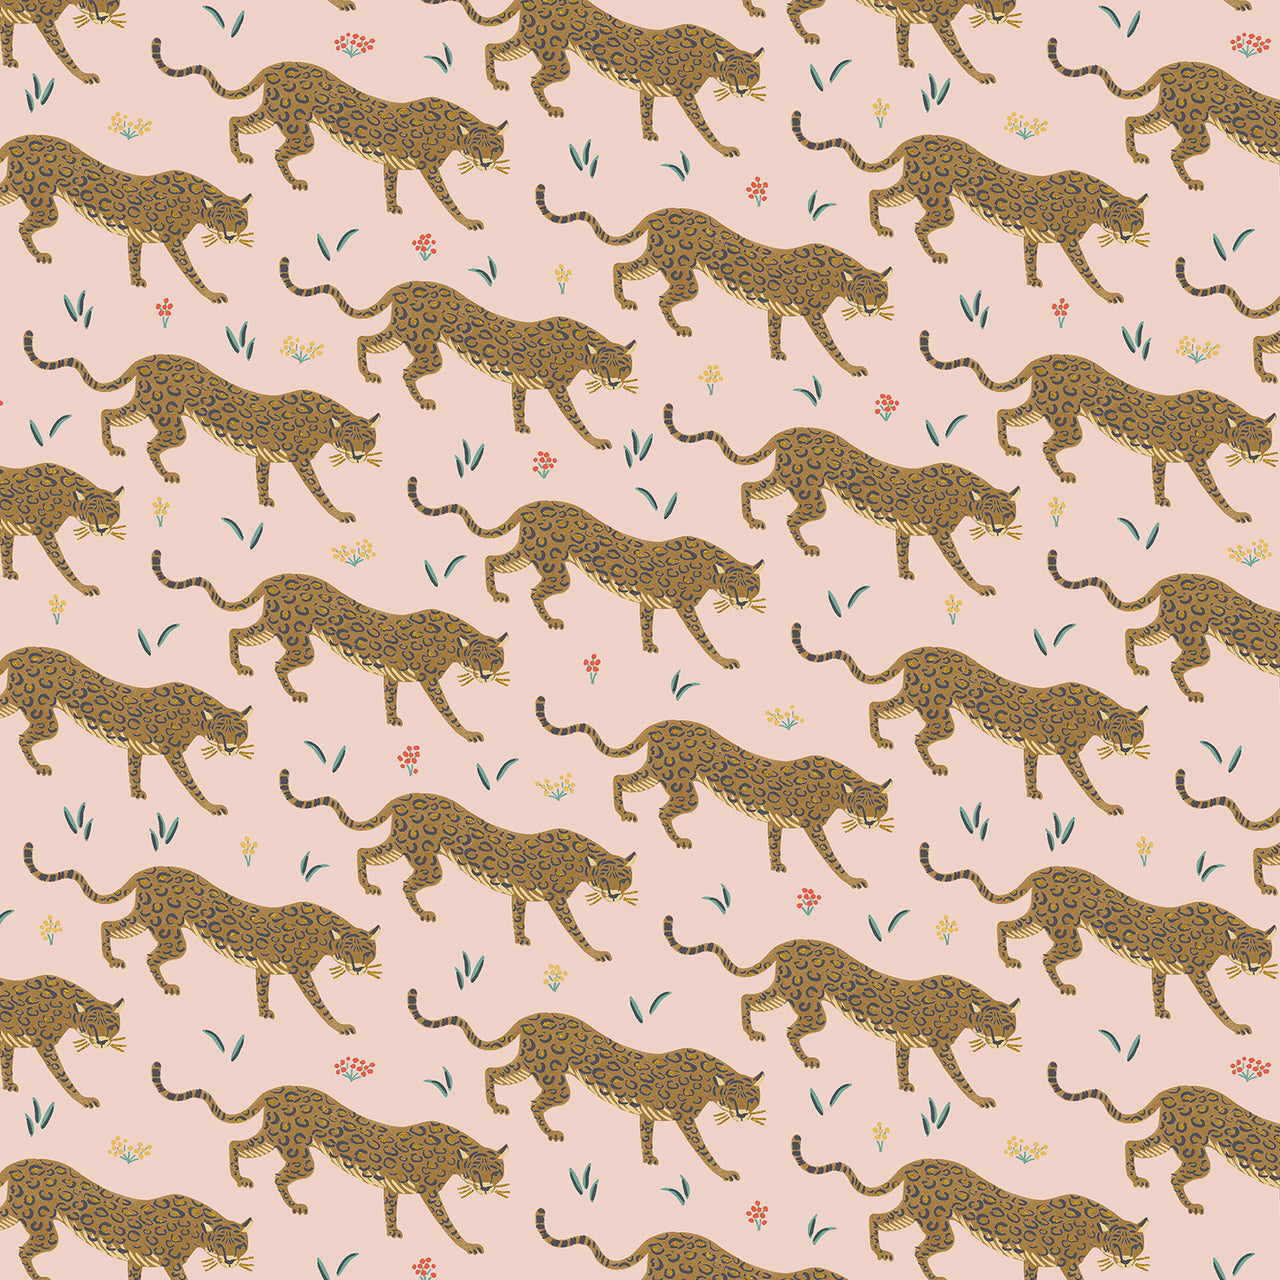 Camont by Rifle Paper Co : Jaguar in Blush Metallic : Cotton and Steel